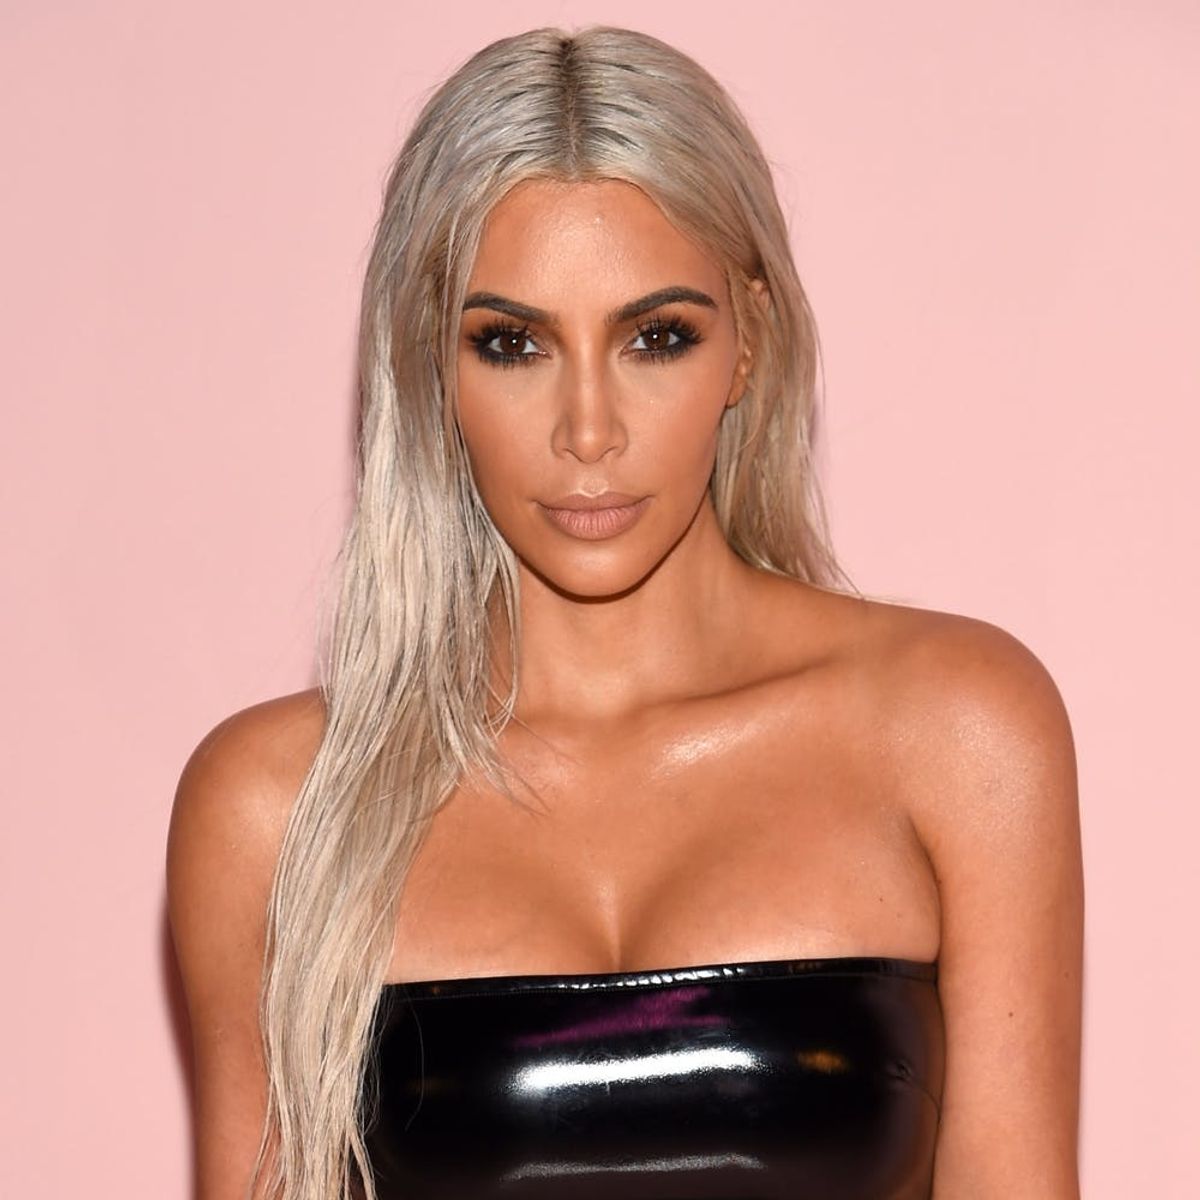 Kim Kardashian Reveals the Sex of Baby No. 3 and What North Wants to Name Her New Sibling